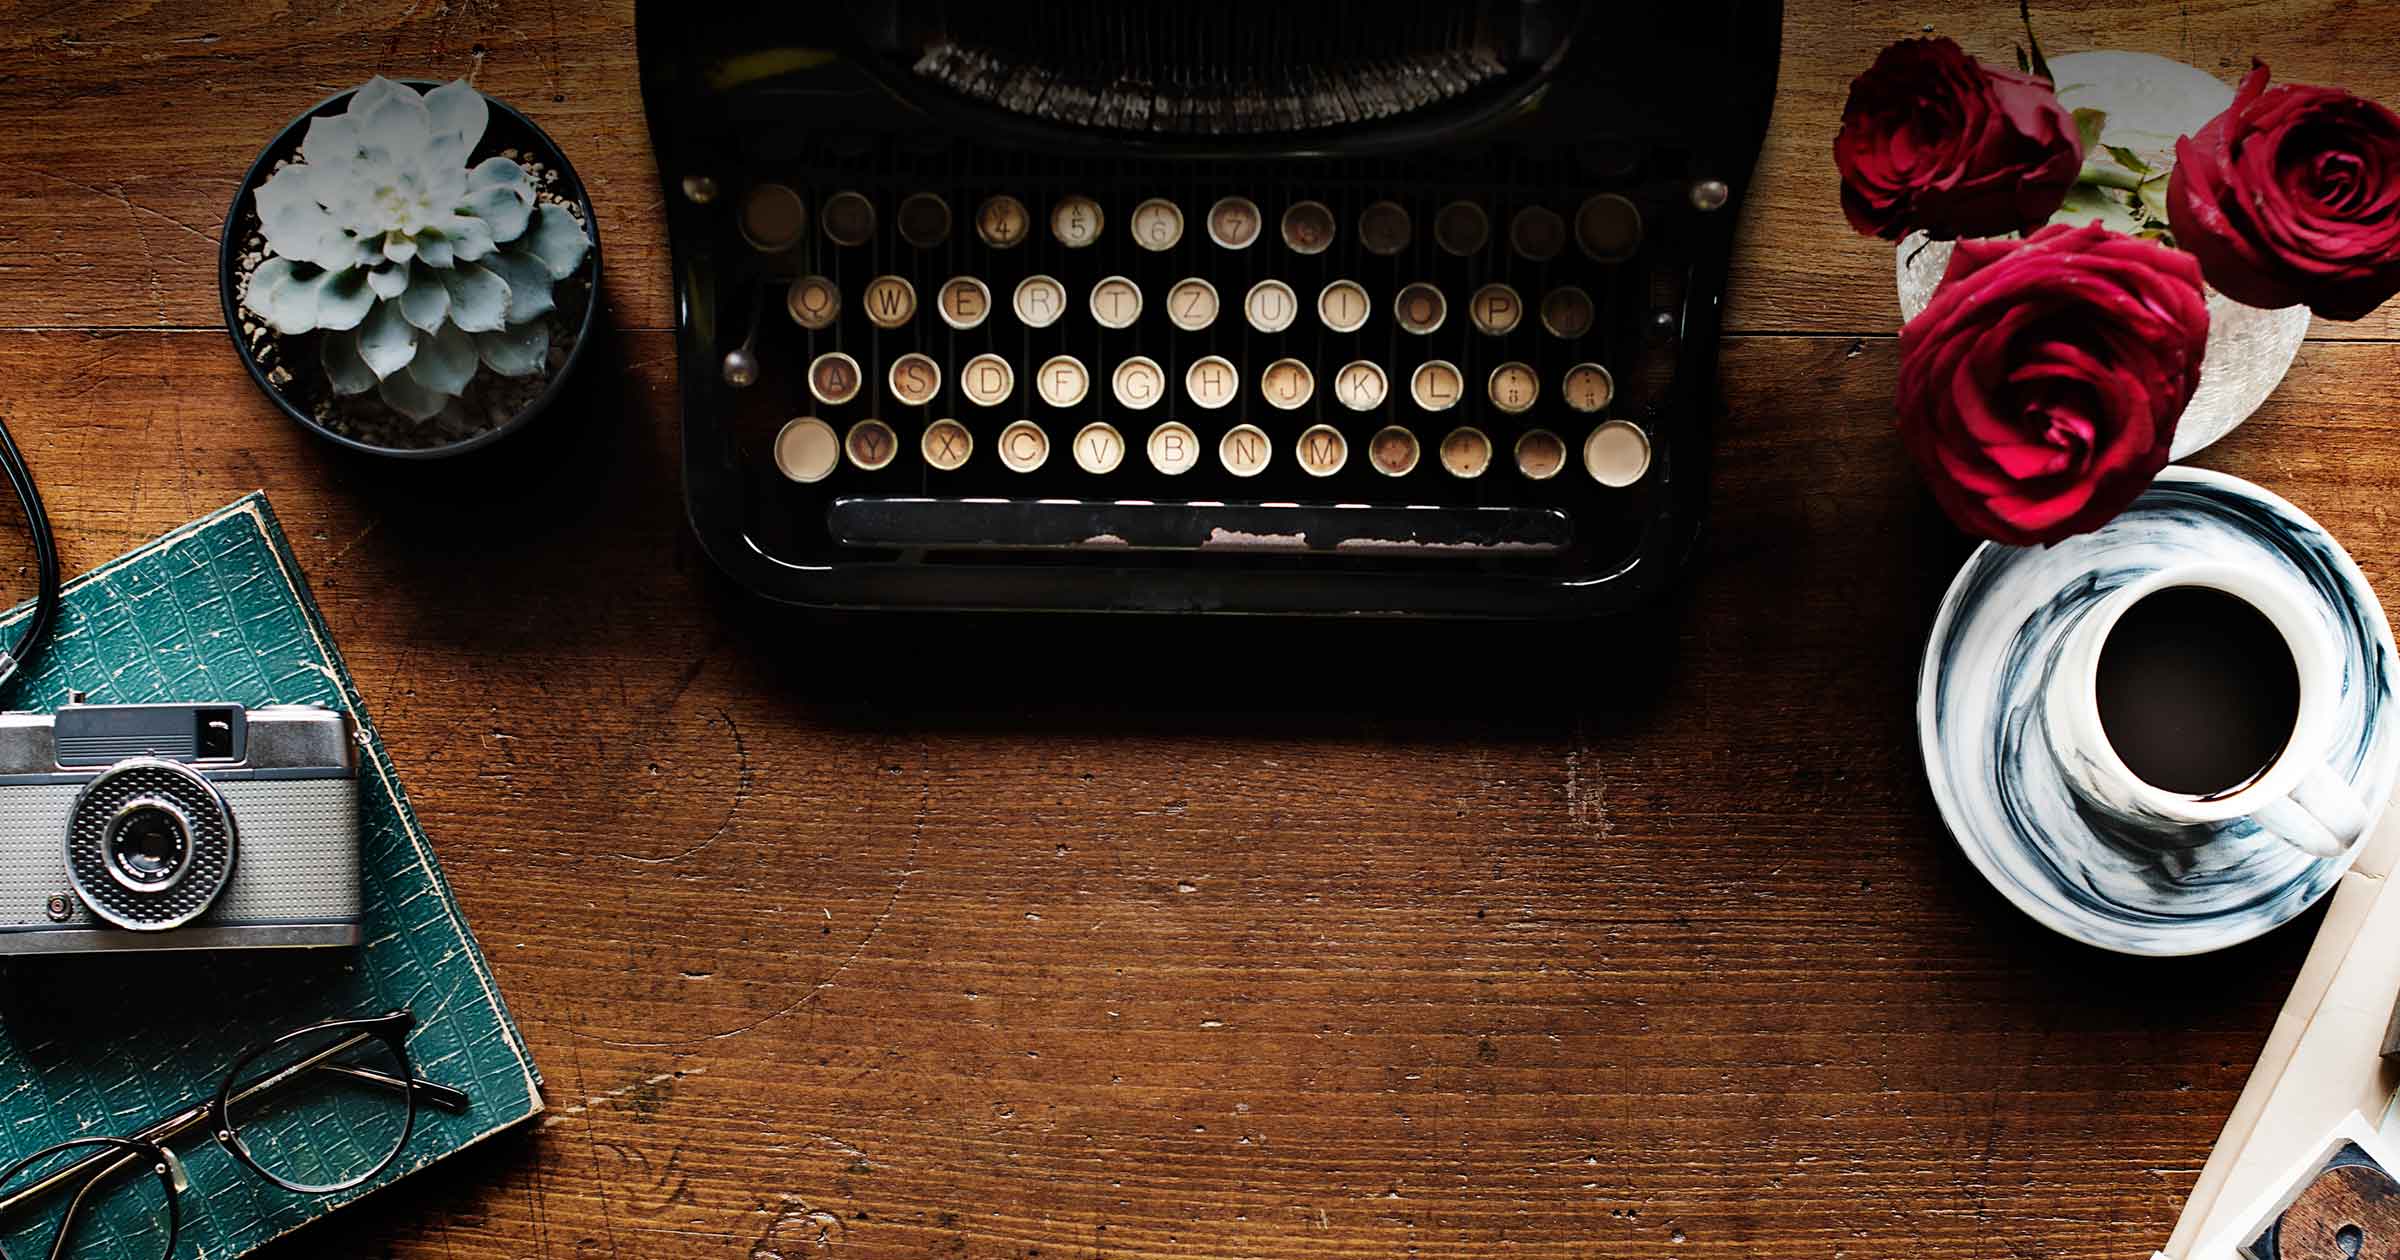 A typewriter sits on a desk, surrounded by other human interest artifacts, like coffee and a camera and flowers.